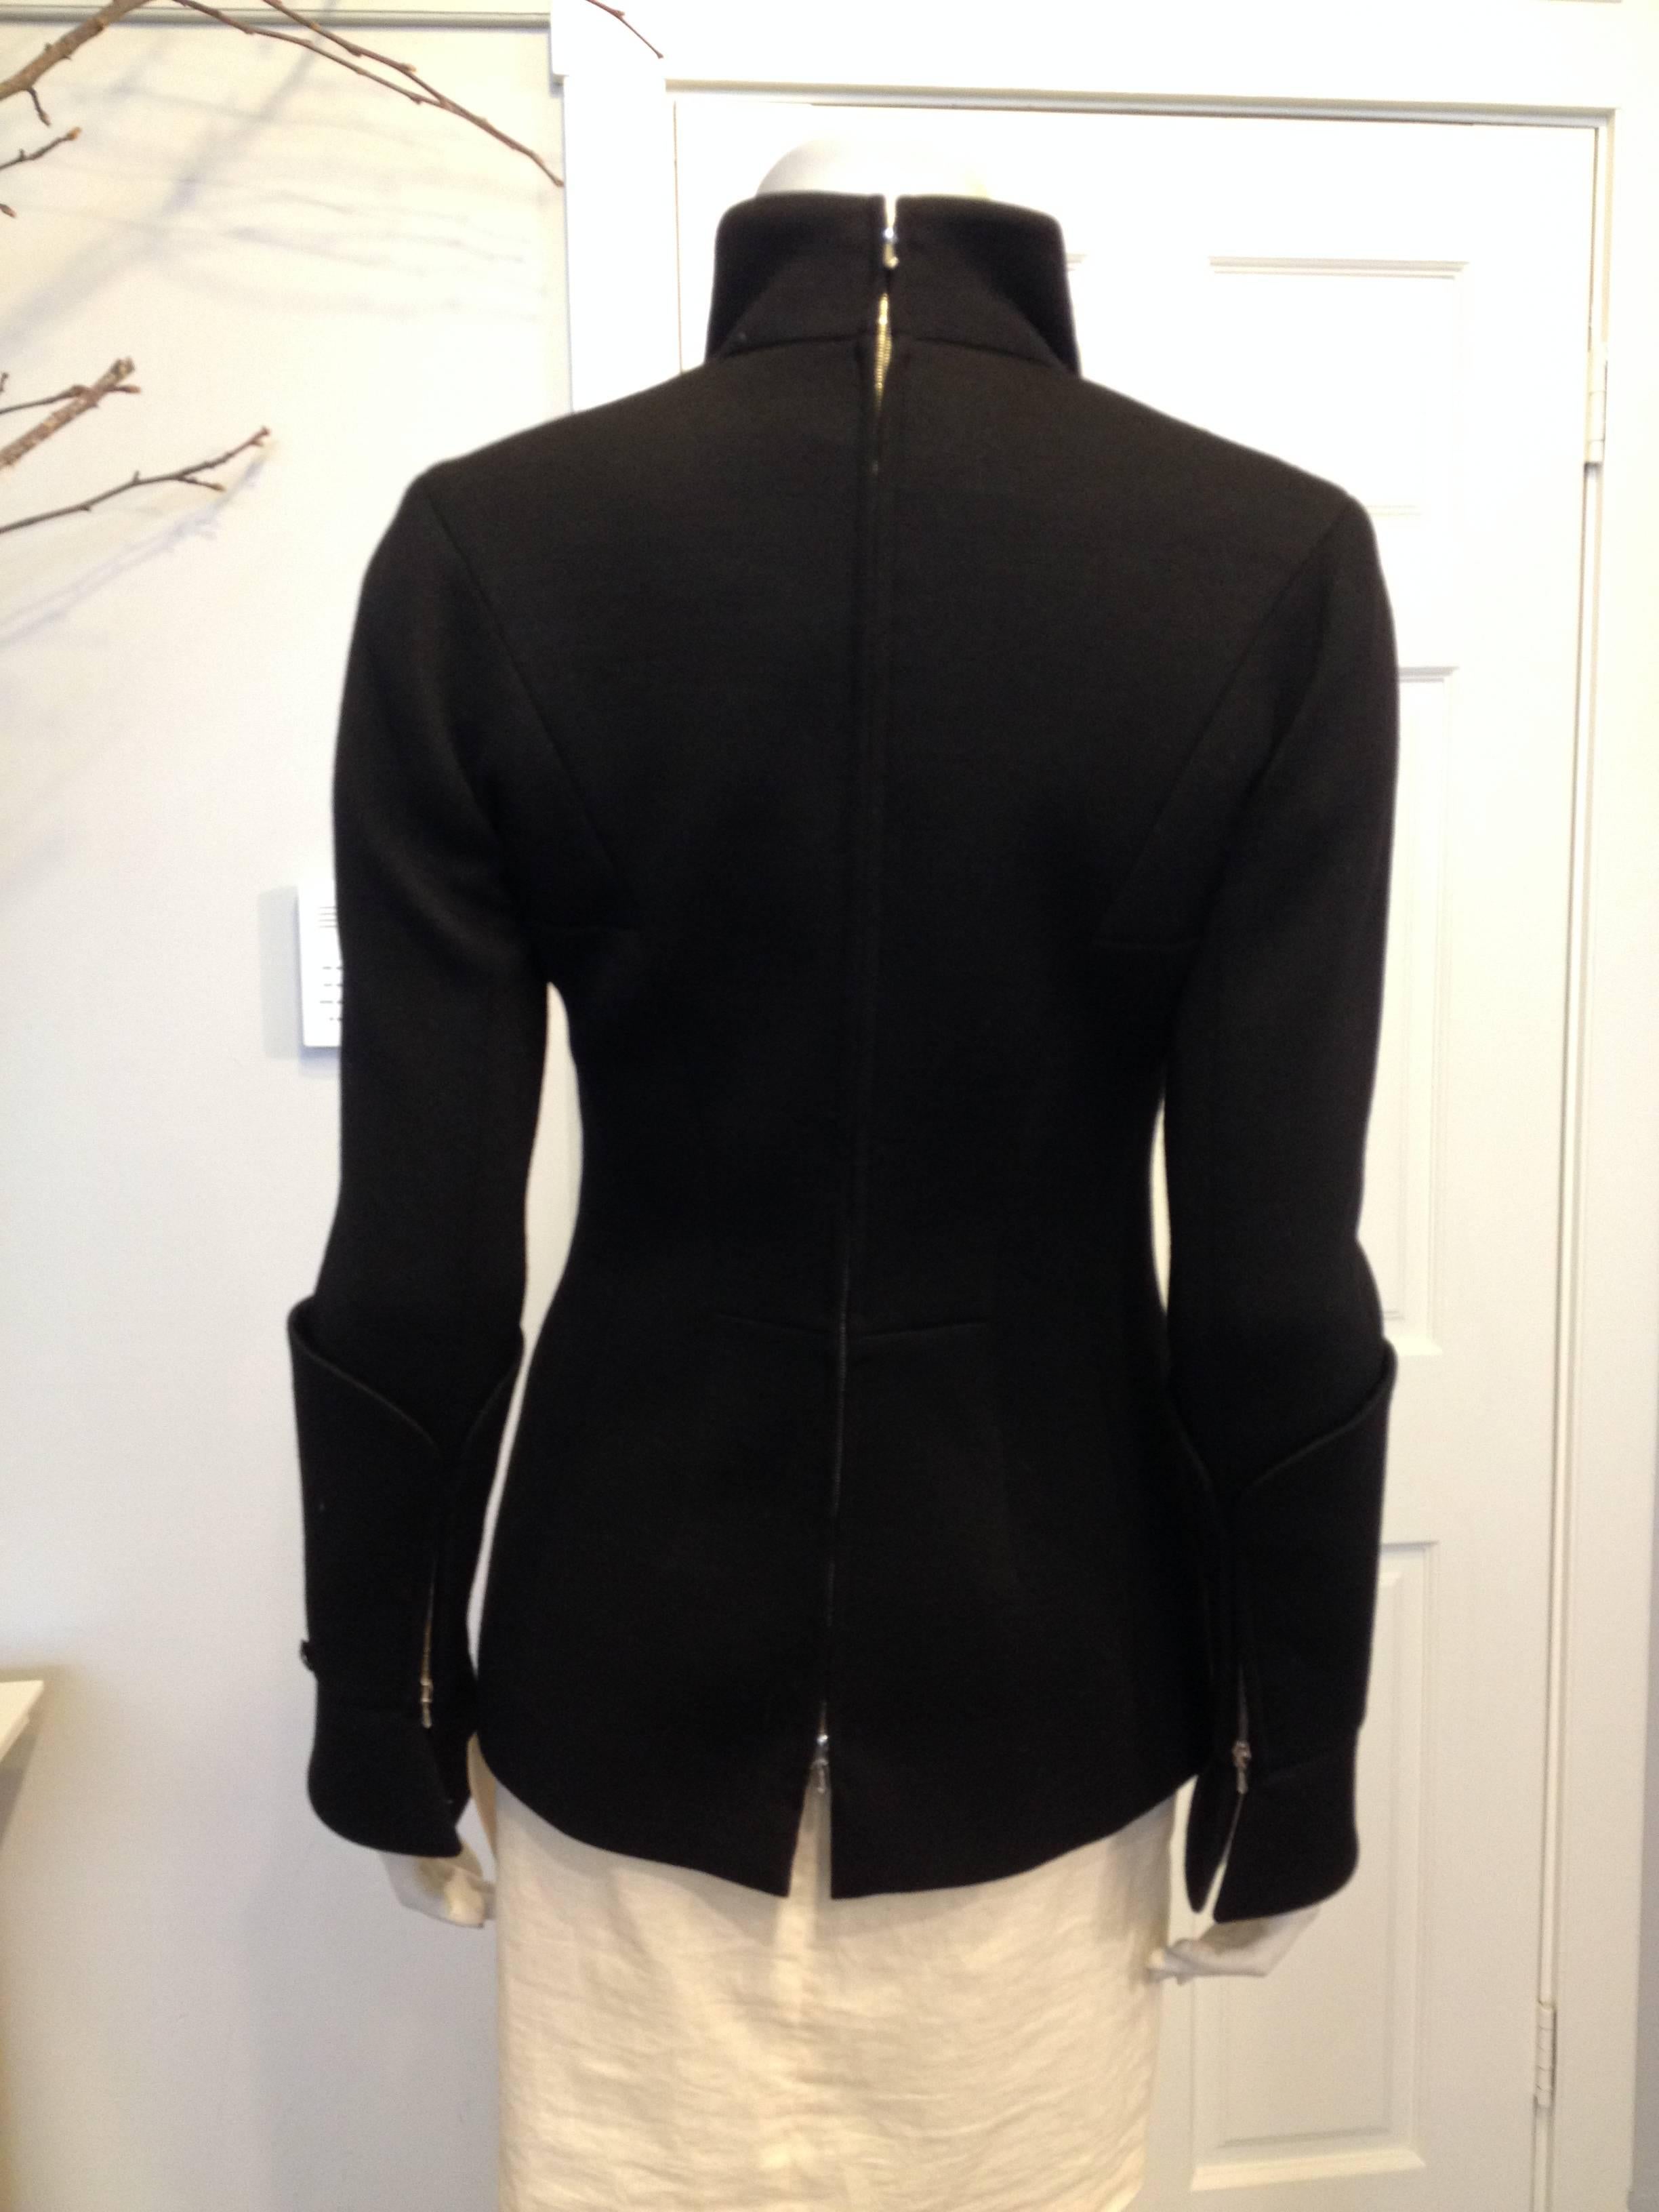 Chanel Black Jacket with Zippers Size 36 (4) In Excellent Condition For Sale In San Francisco, CA